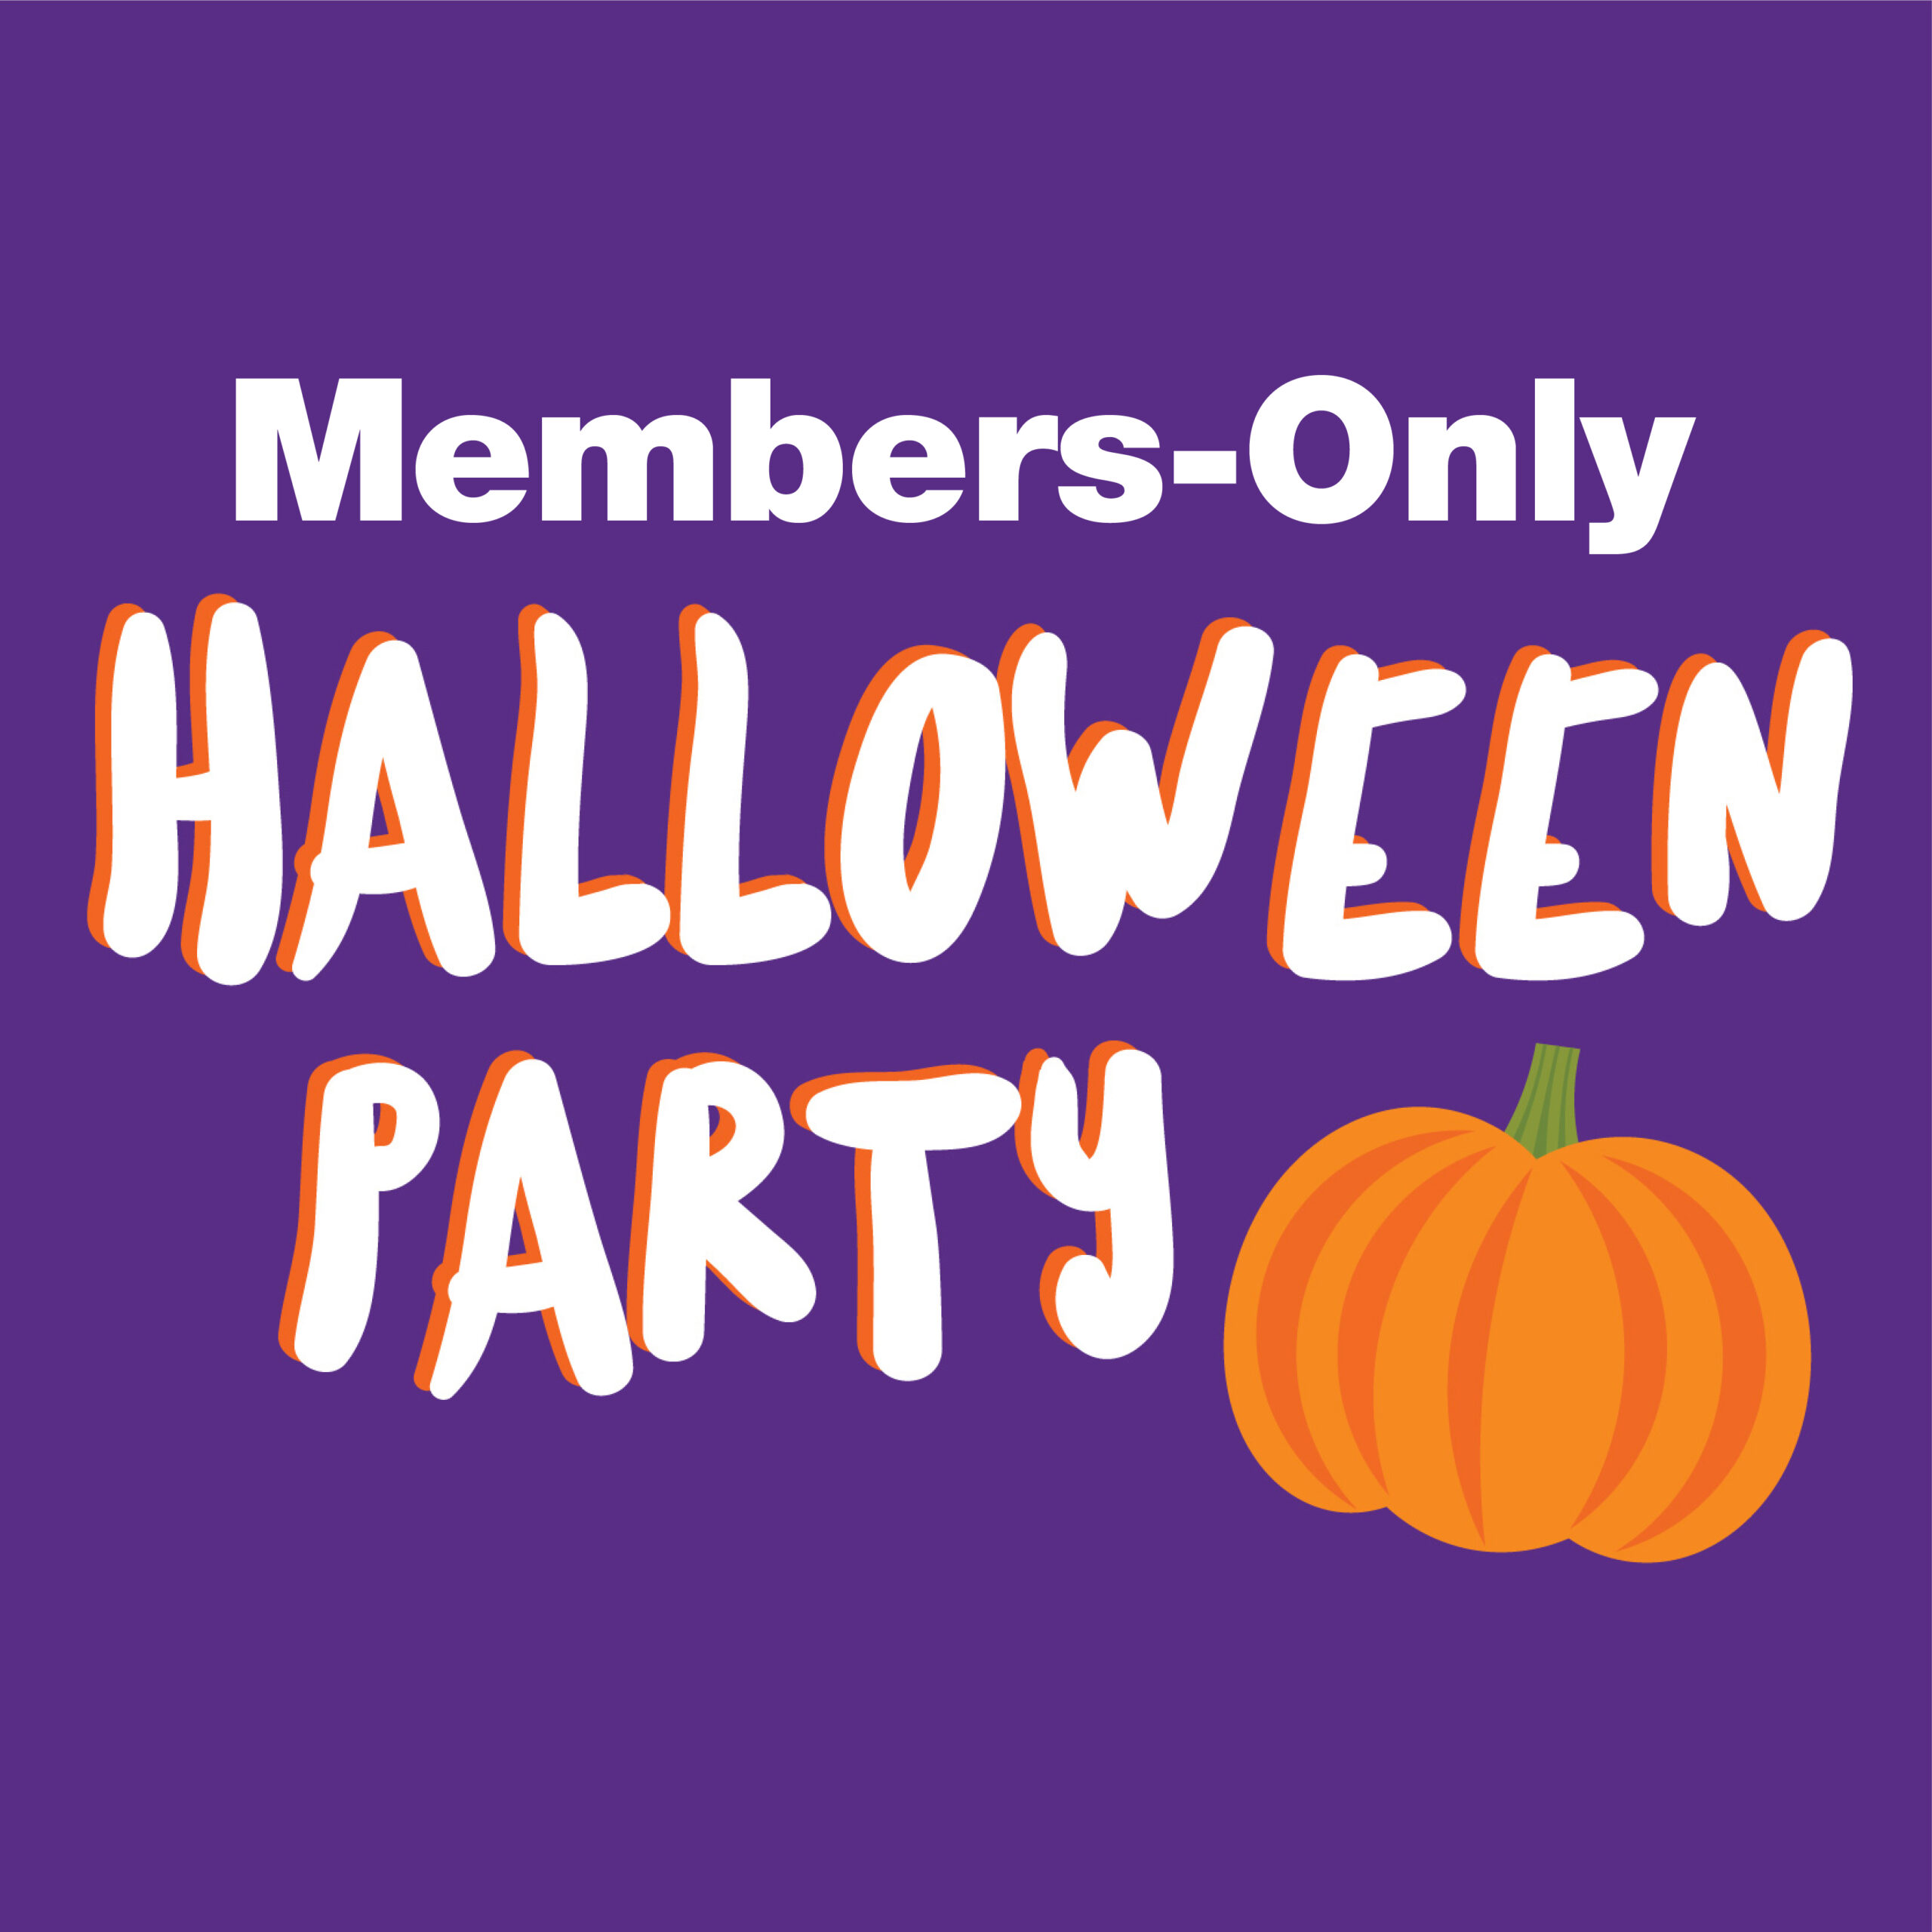 Members-Only Halloween Party